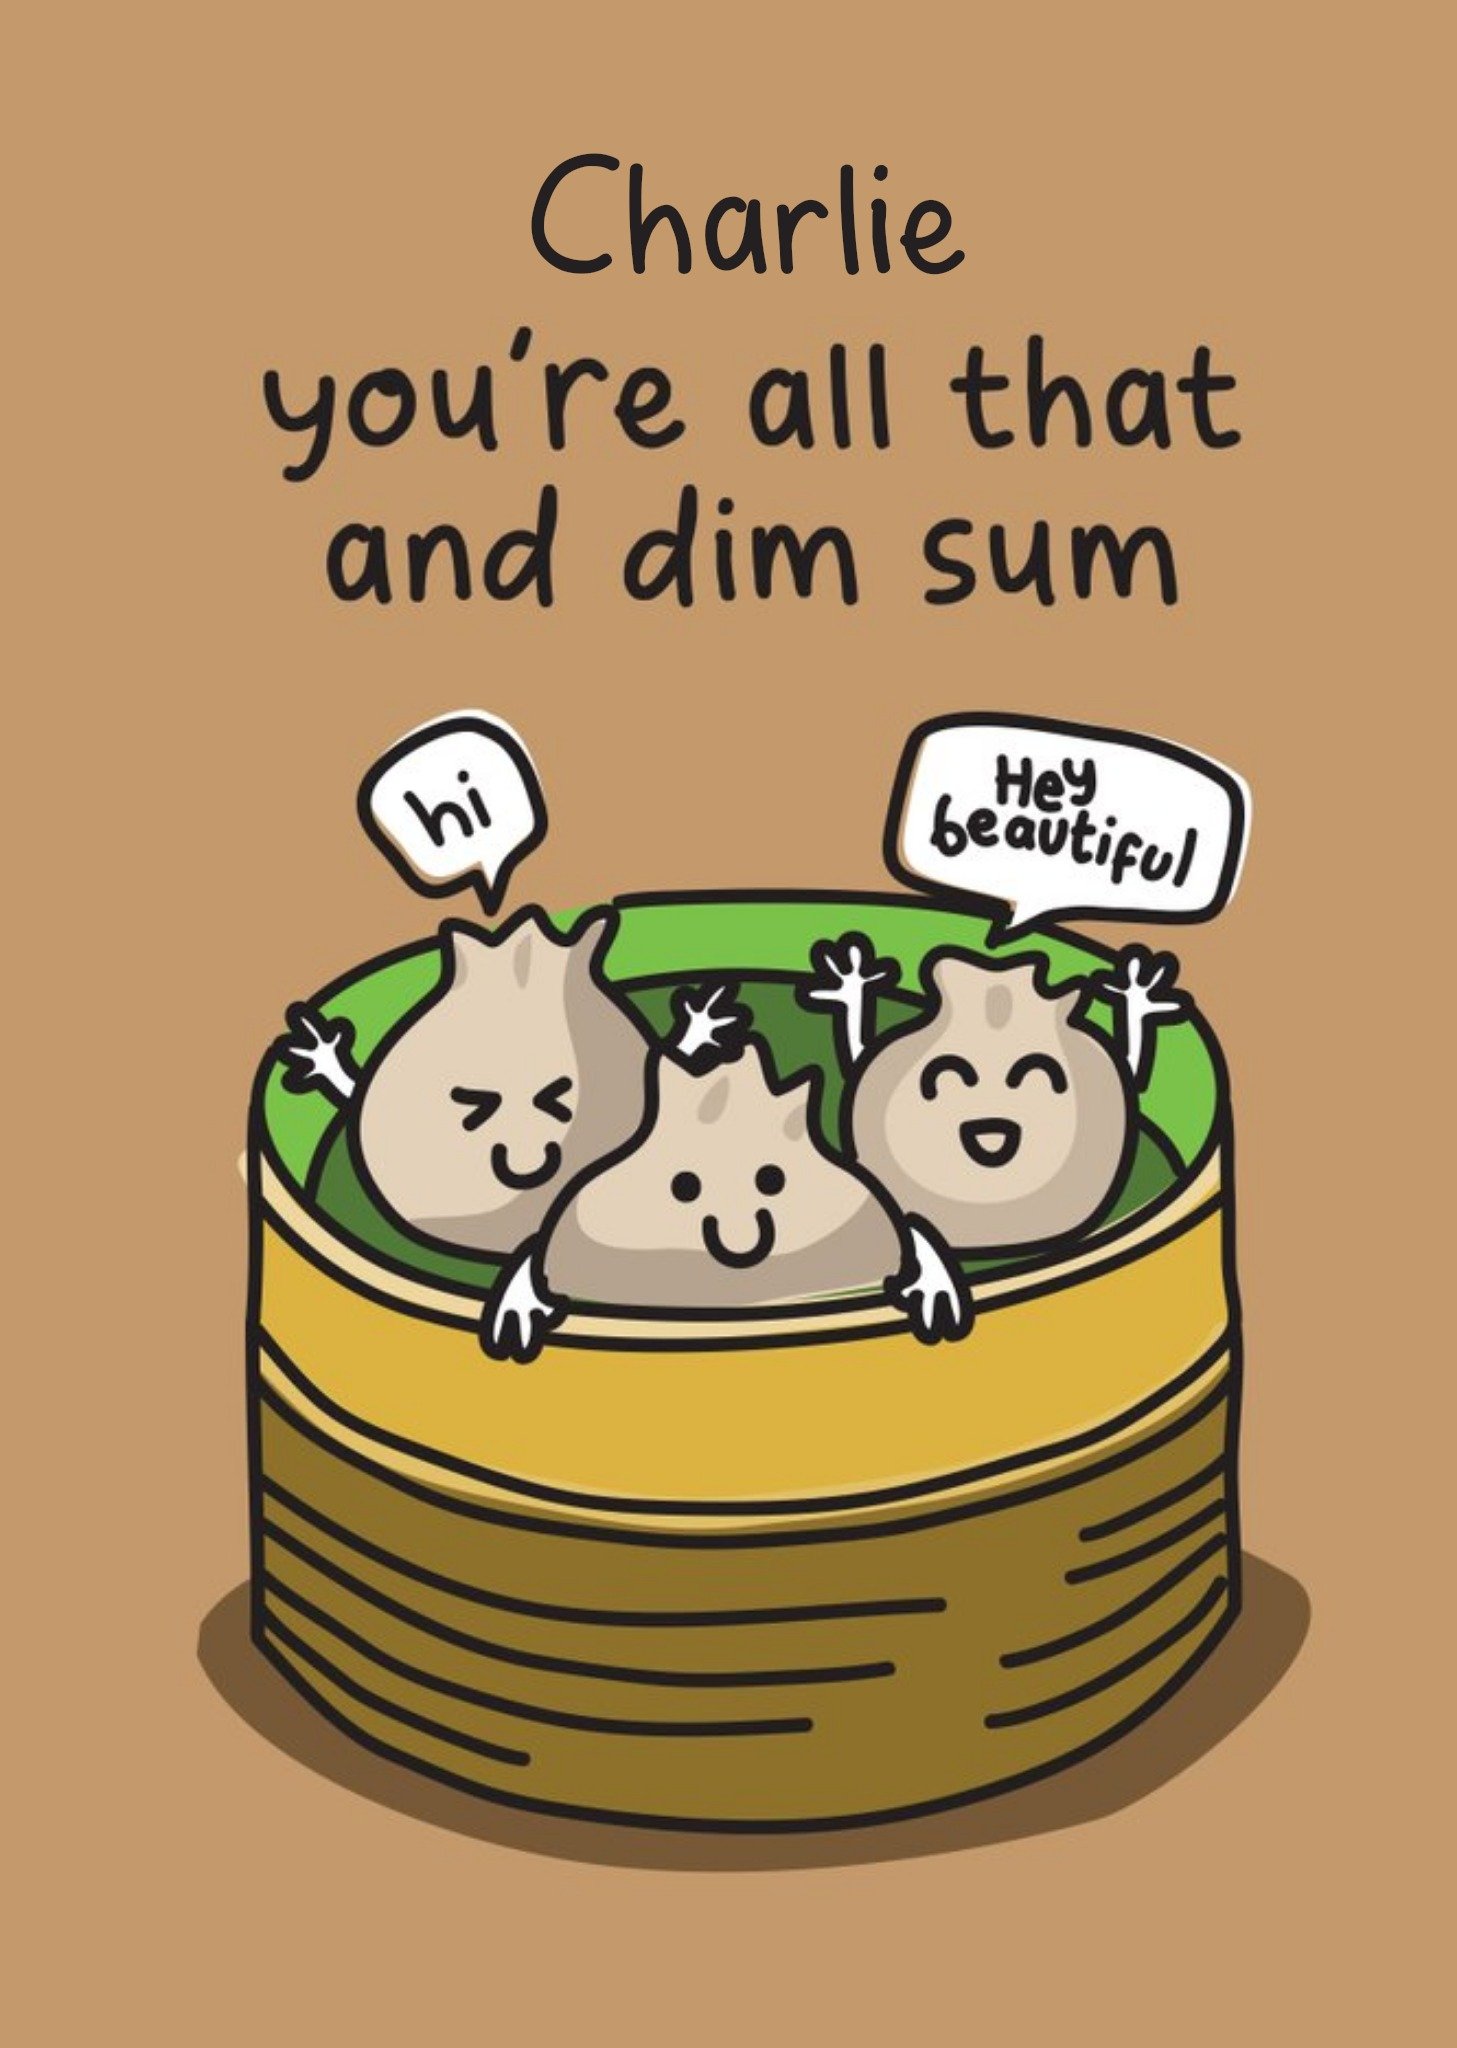 Moonpig Illustration Of Dim Sum. You're All That And Dim Sum Birthday Card, Large